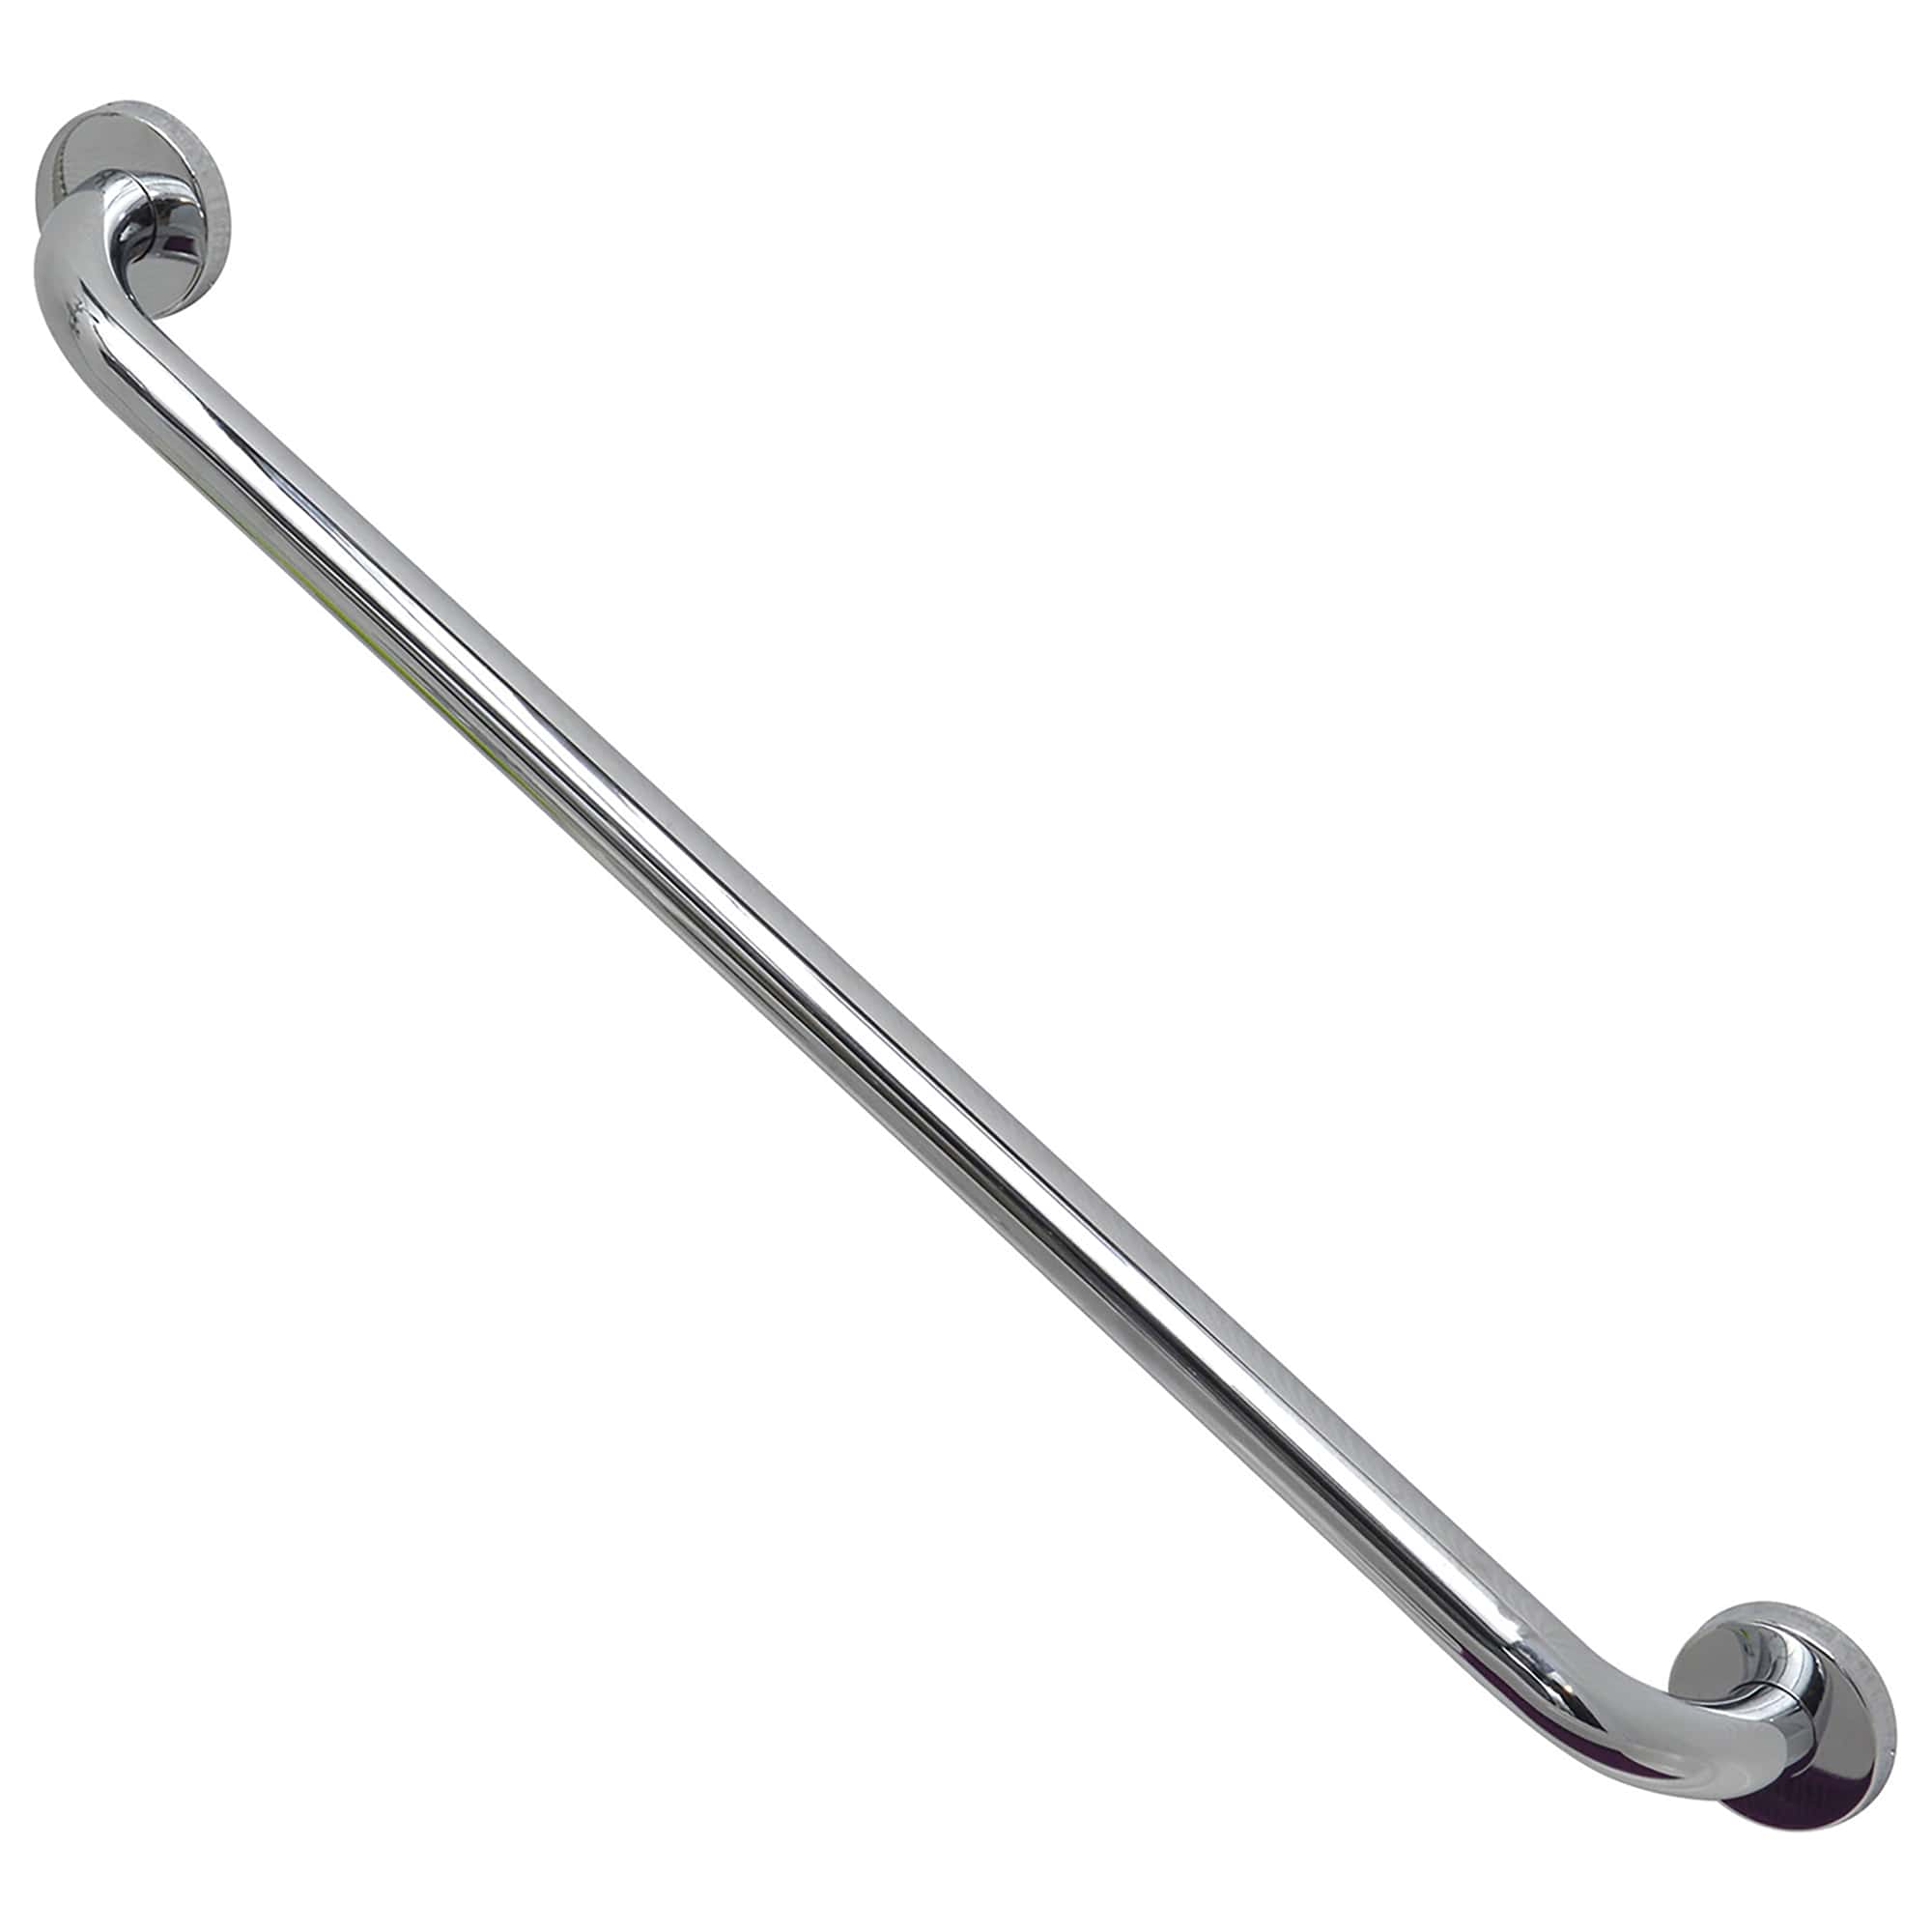 Stainless-Steel-Bath-and-Shower-Straight-Grab-Bar-Concealed-Mounting-Snap-Flange-1-Diameter-x-23.6-Length-Chrome